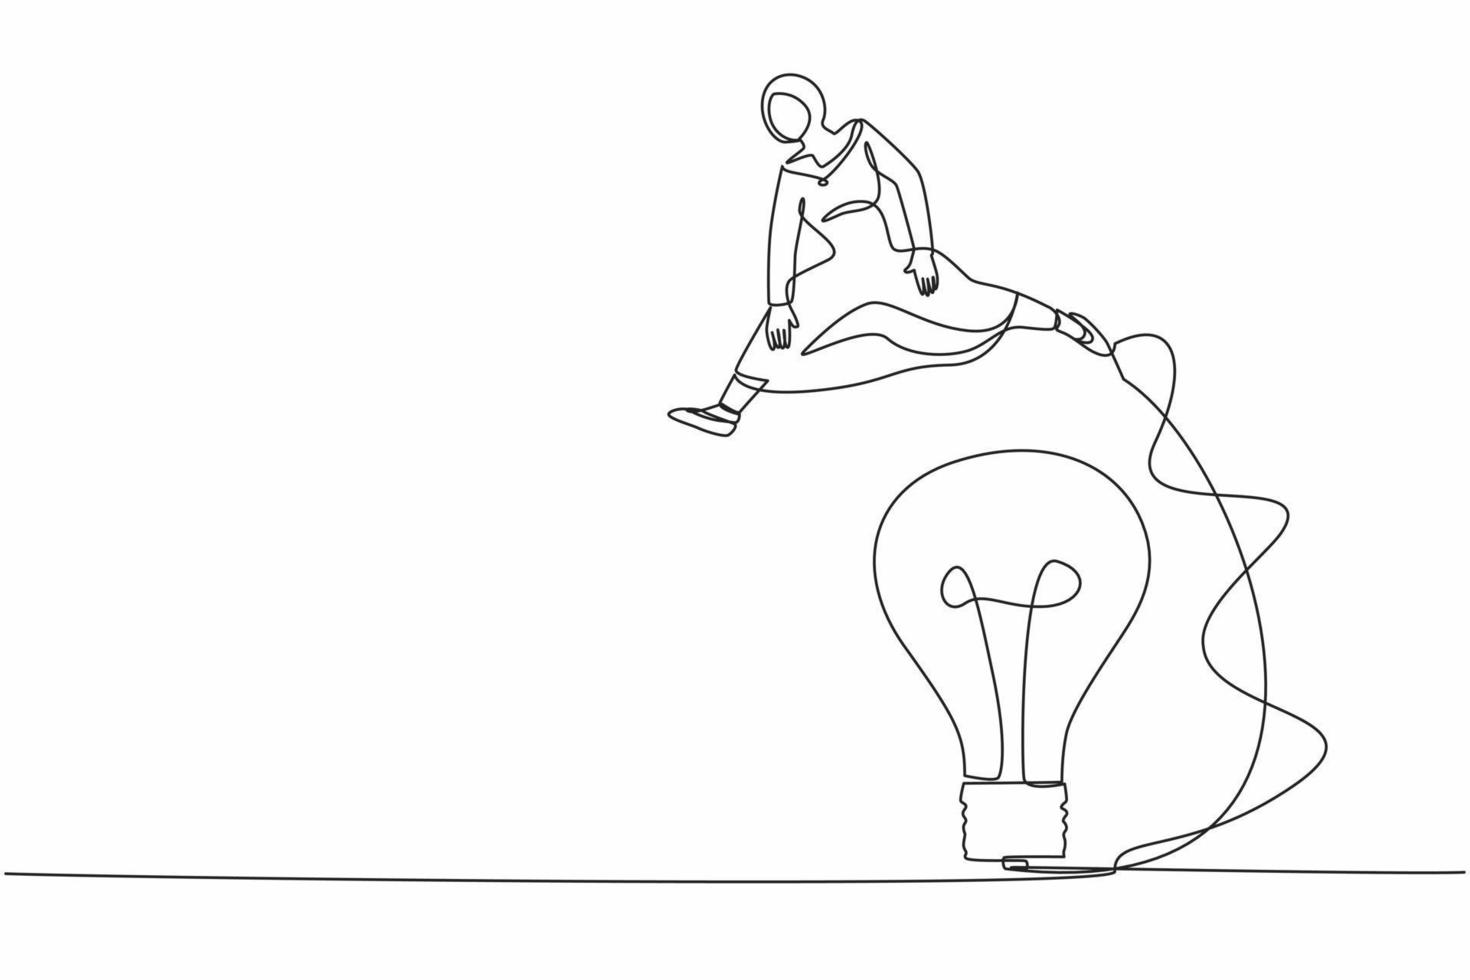 Single continuous line drawing Arabian businesswoman jumping over big light bulb. Innovation transformation technology. Improvisation business idea. One line draw graphic design vector illustration